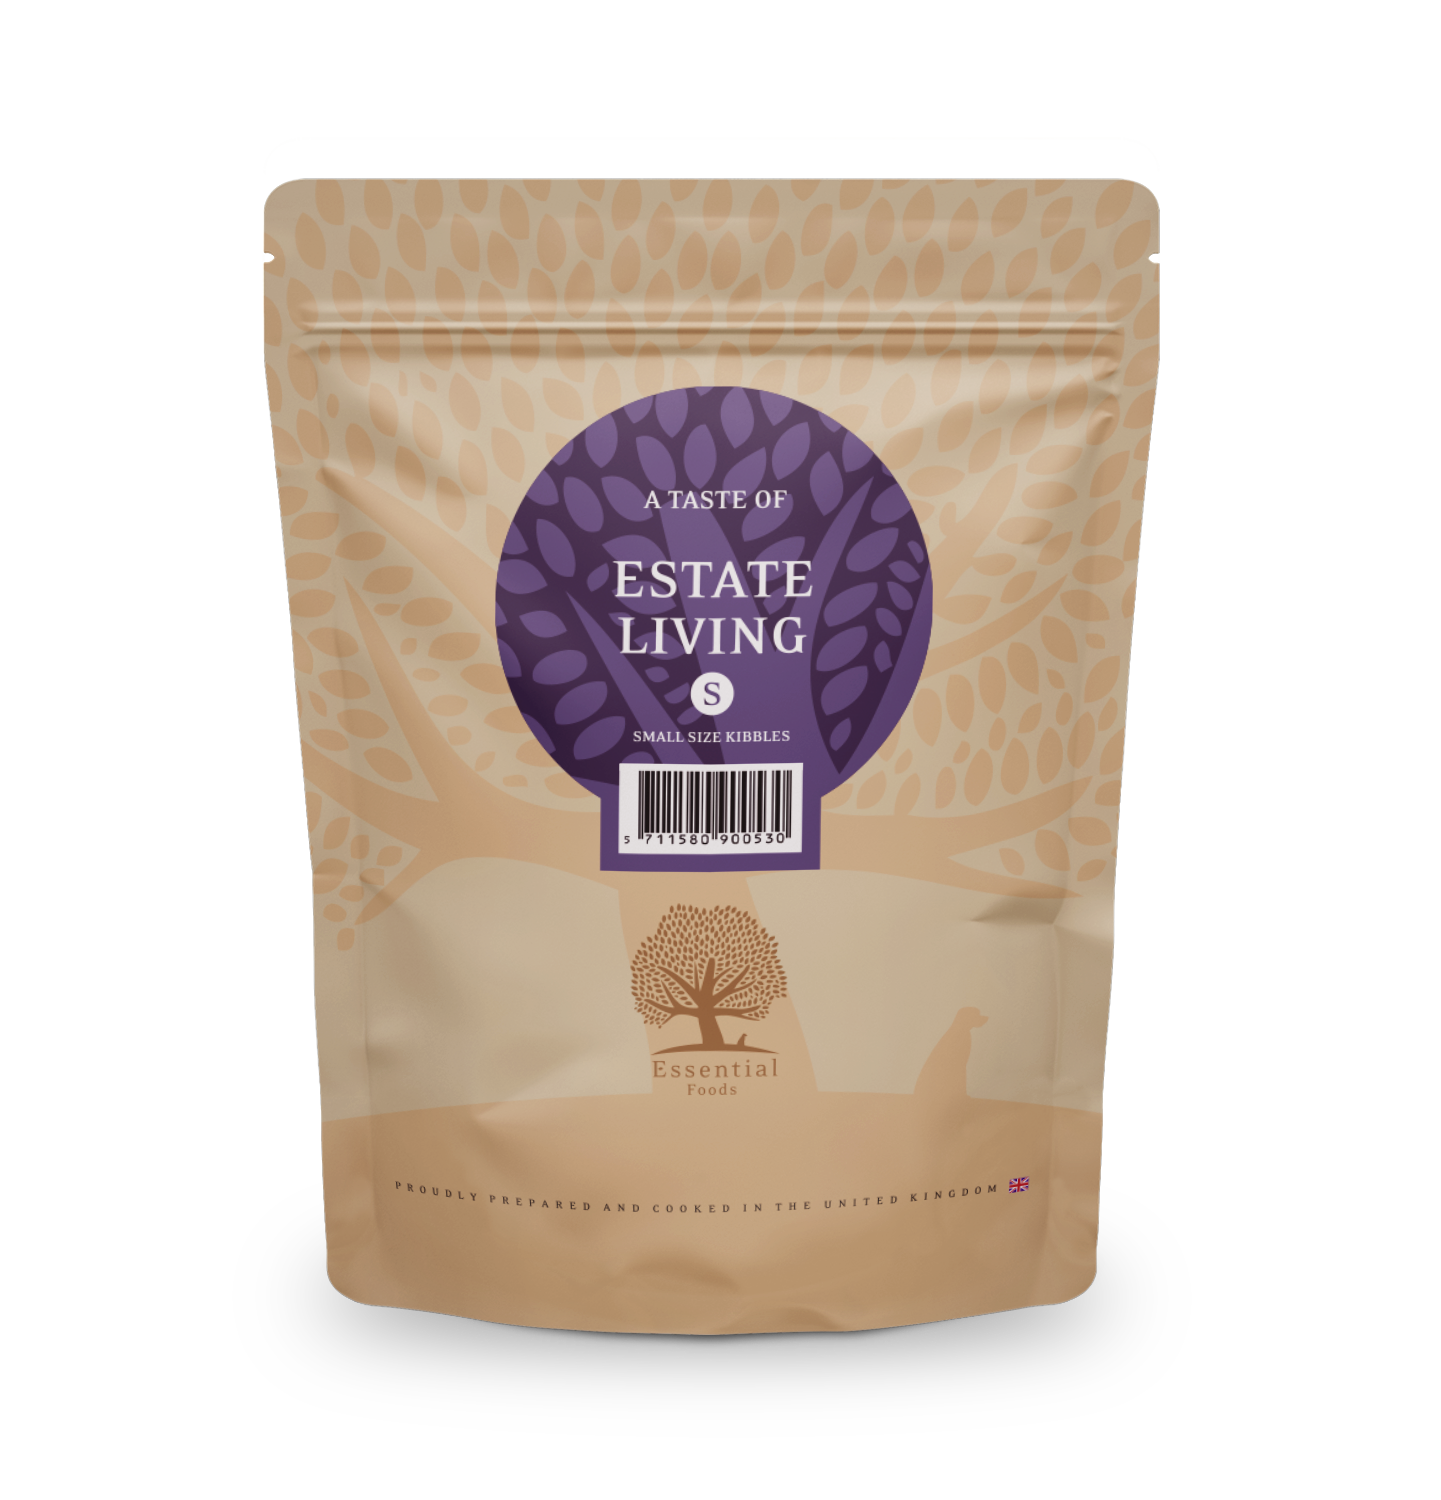 74% meat Yorkshire deer, lamb, chick, eggs Super premium grainless feed for adult dogs of small breeds weighing up to 15kg ESTATE LIVING